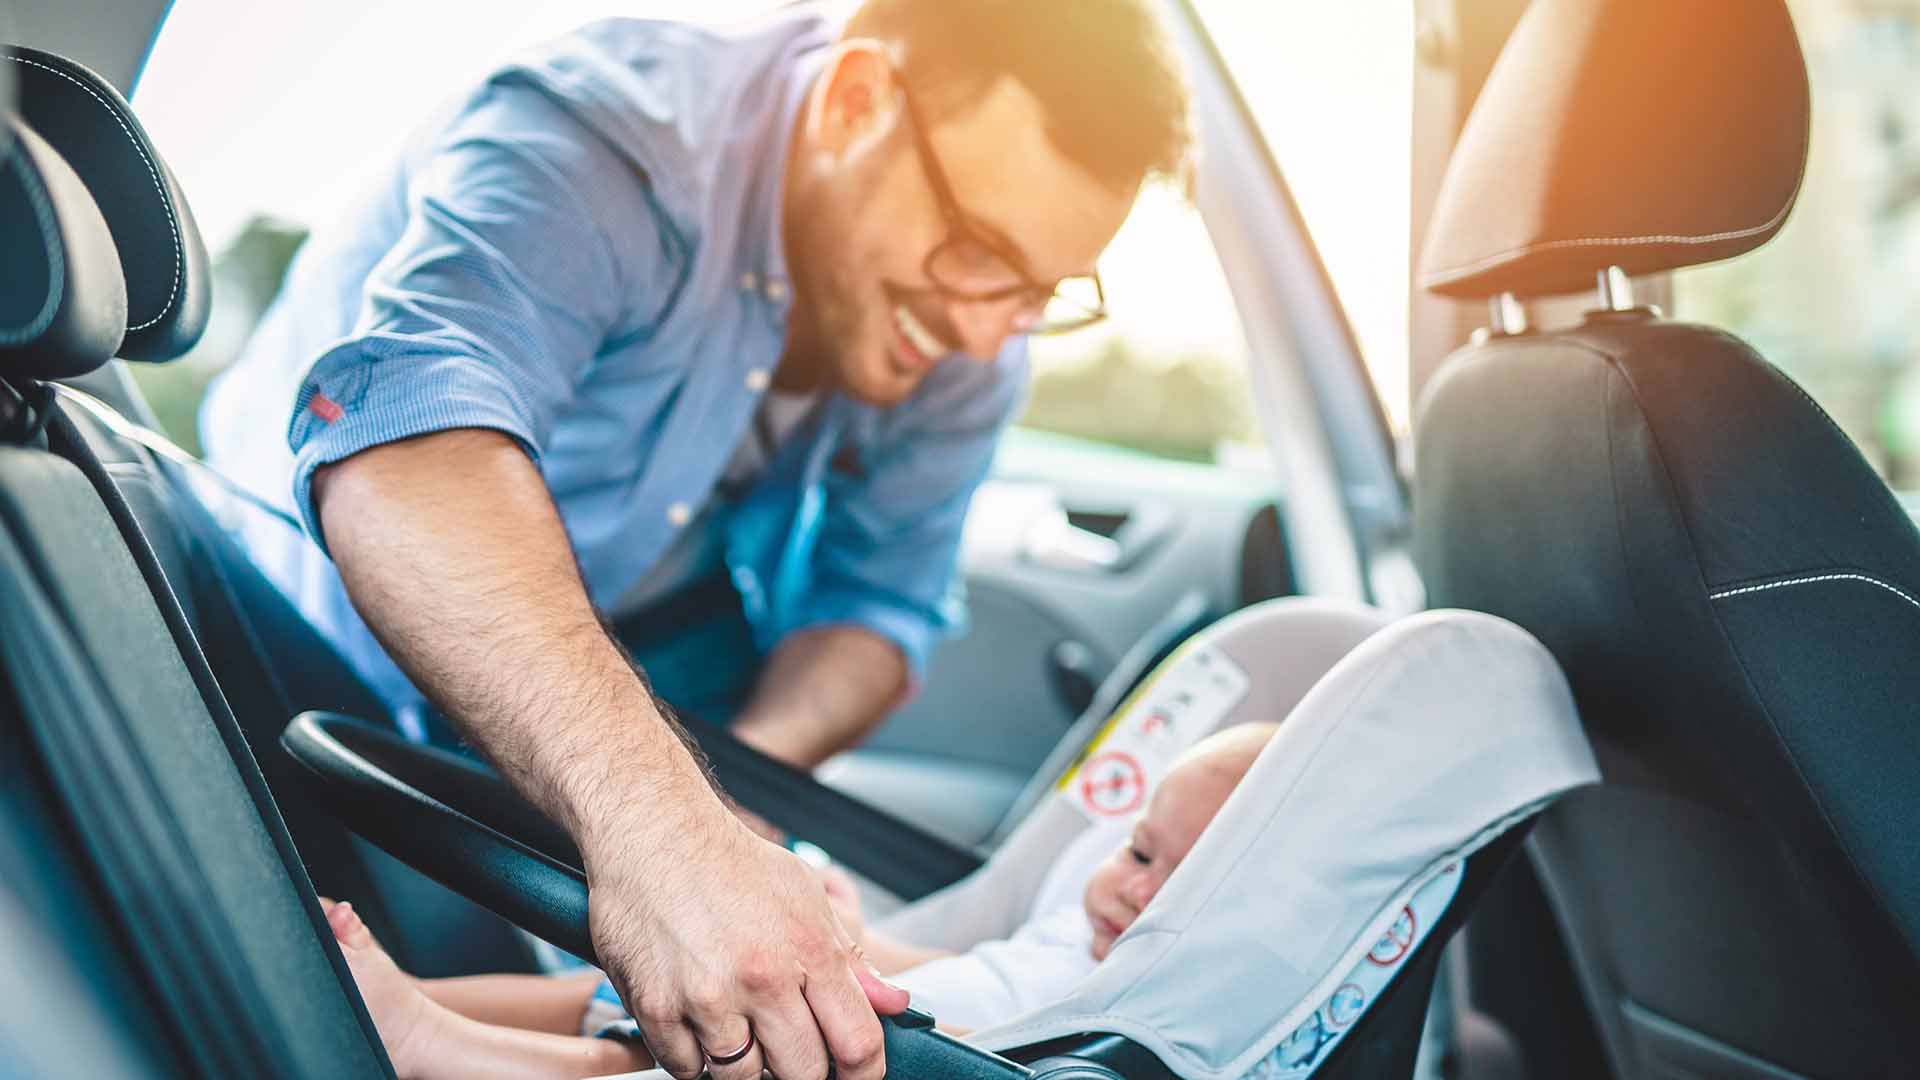 Father placing baby in car seat